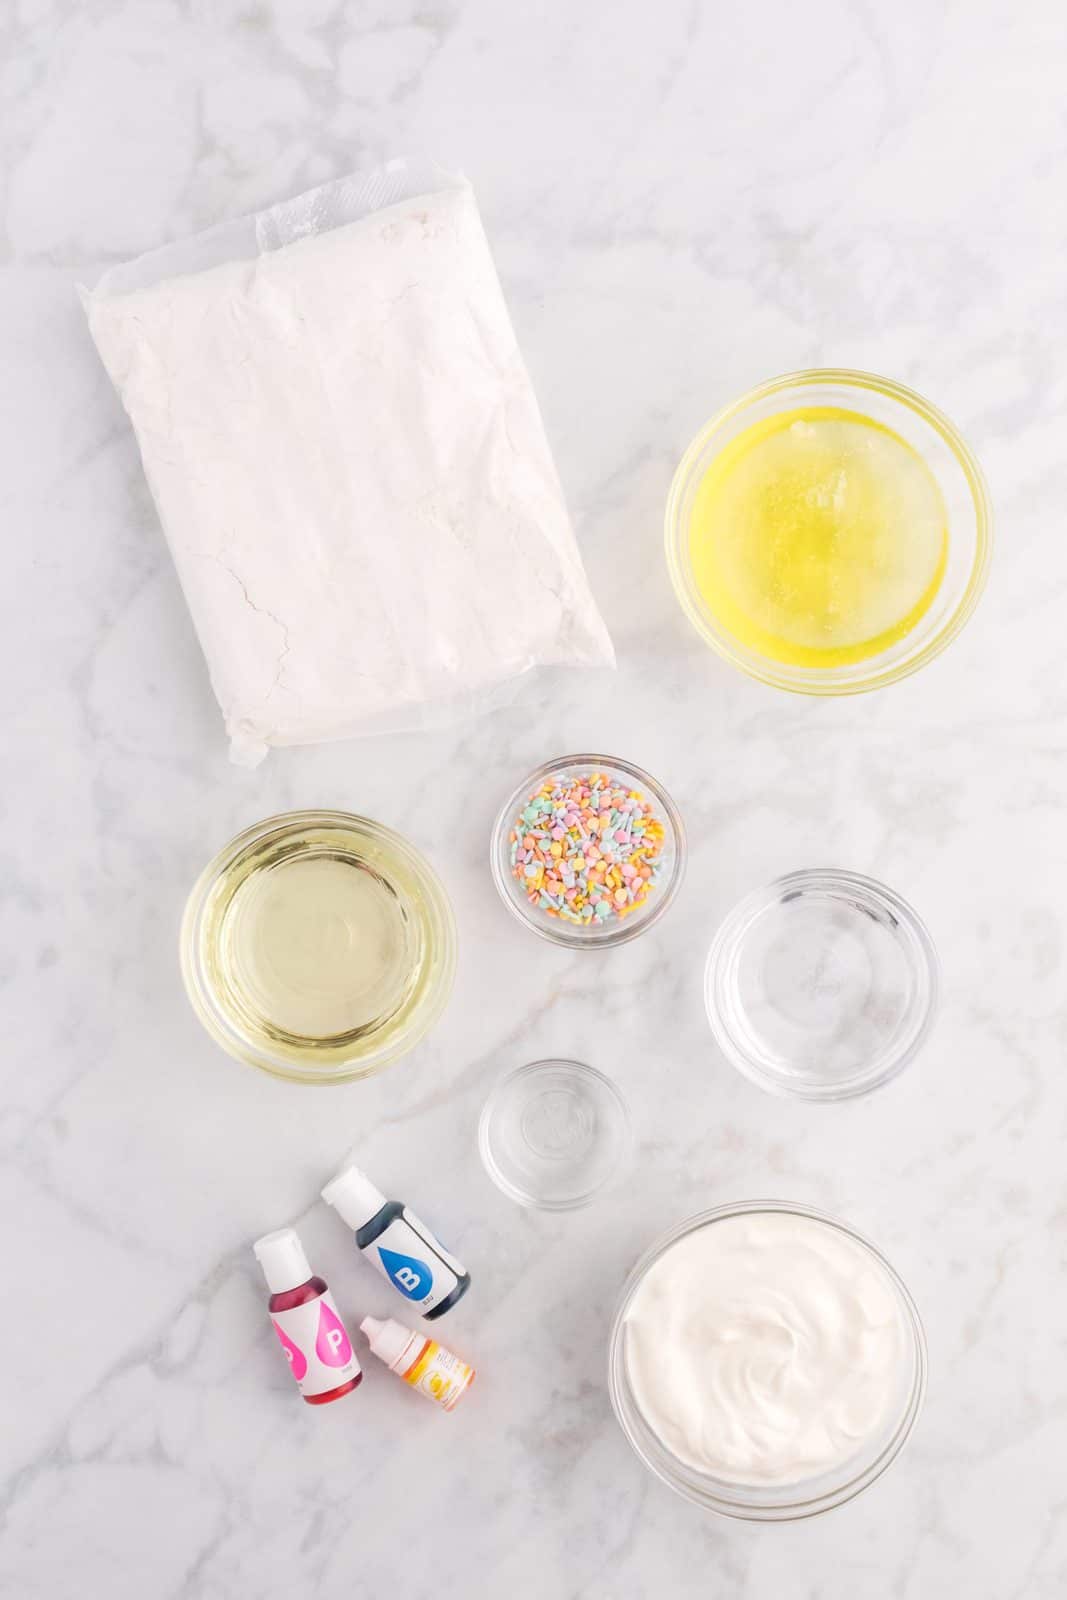 Ingredients needed: white cake mix, water, egg whites, vegetable oil, sour cream, vanilla extract, blue, pink, and yellow food coloring, pastel colored sprinkles, butter, powdered sugar, salt and heavy cream.